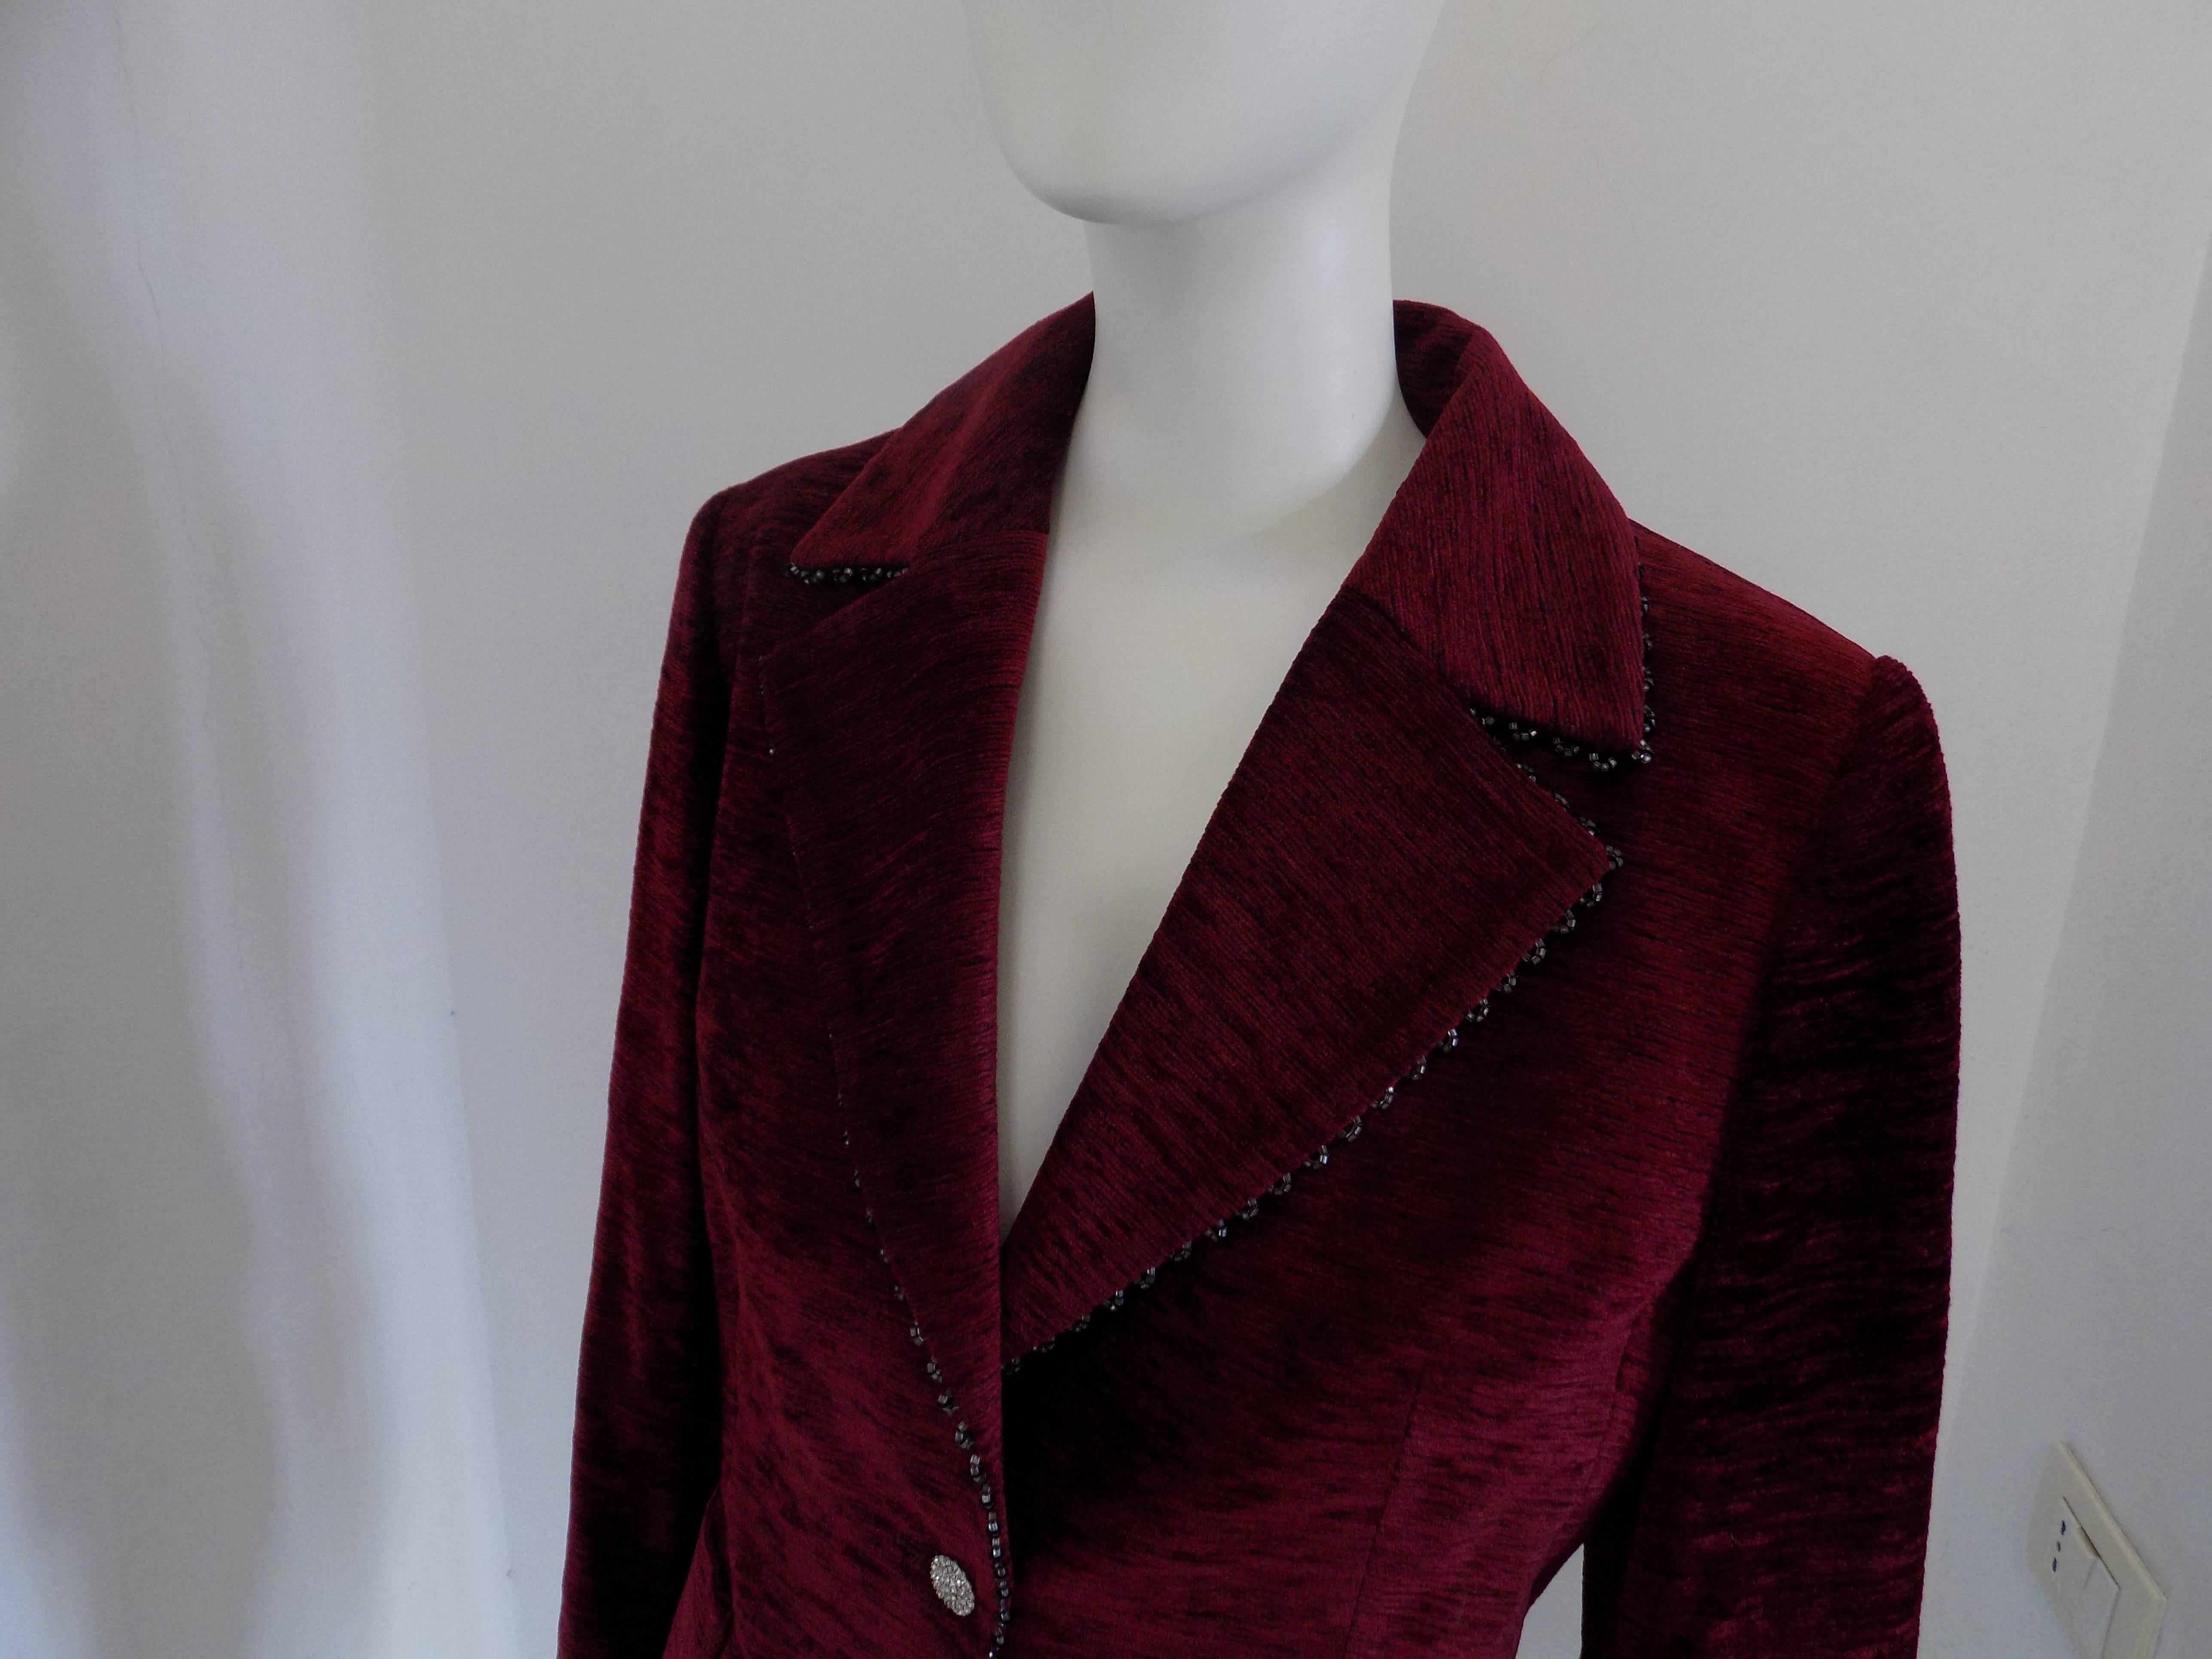 1970s Darà bordeaux velvet jacket totally made in italy in italian size range 42
Composition: acetate viscose 